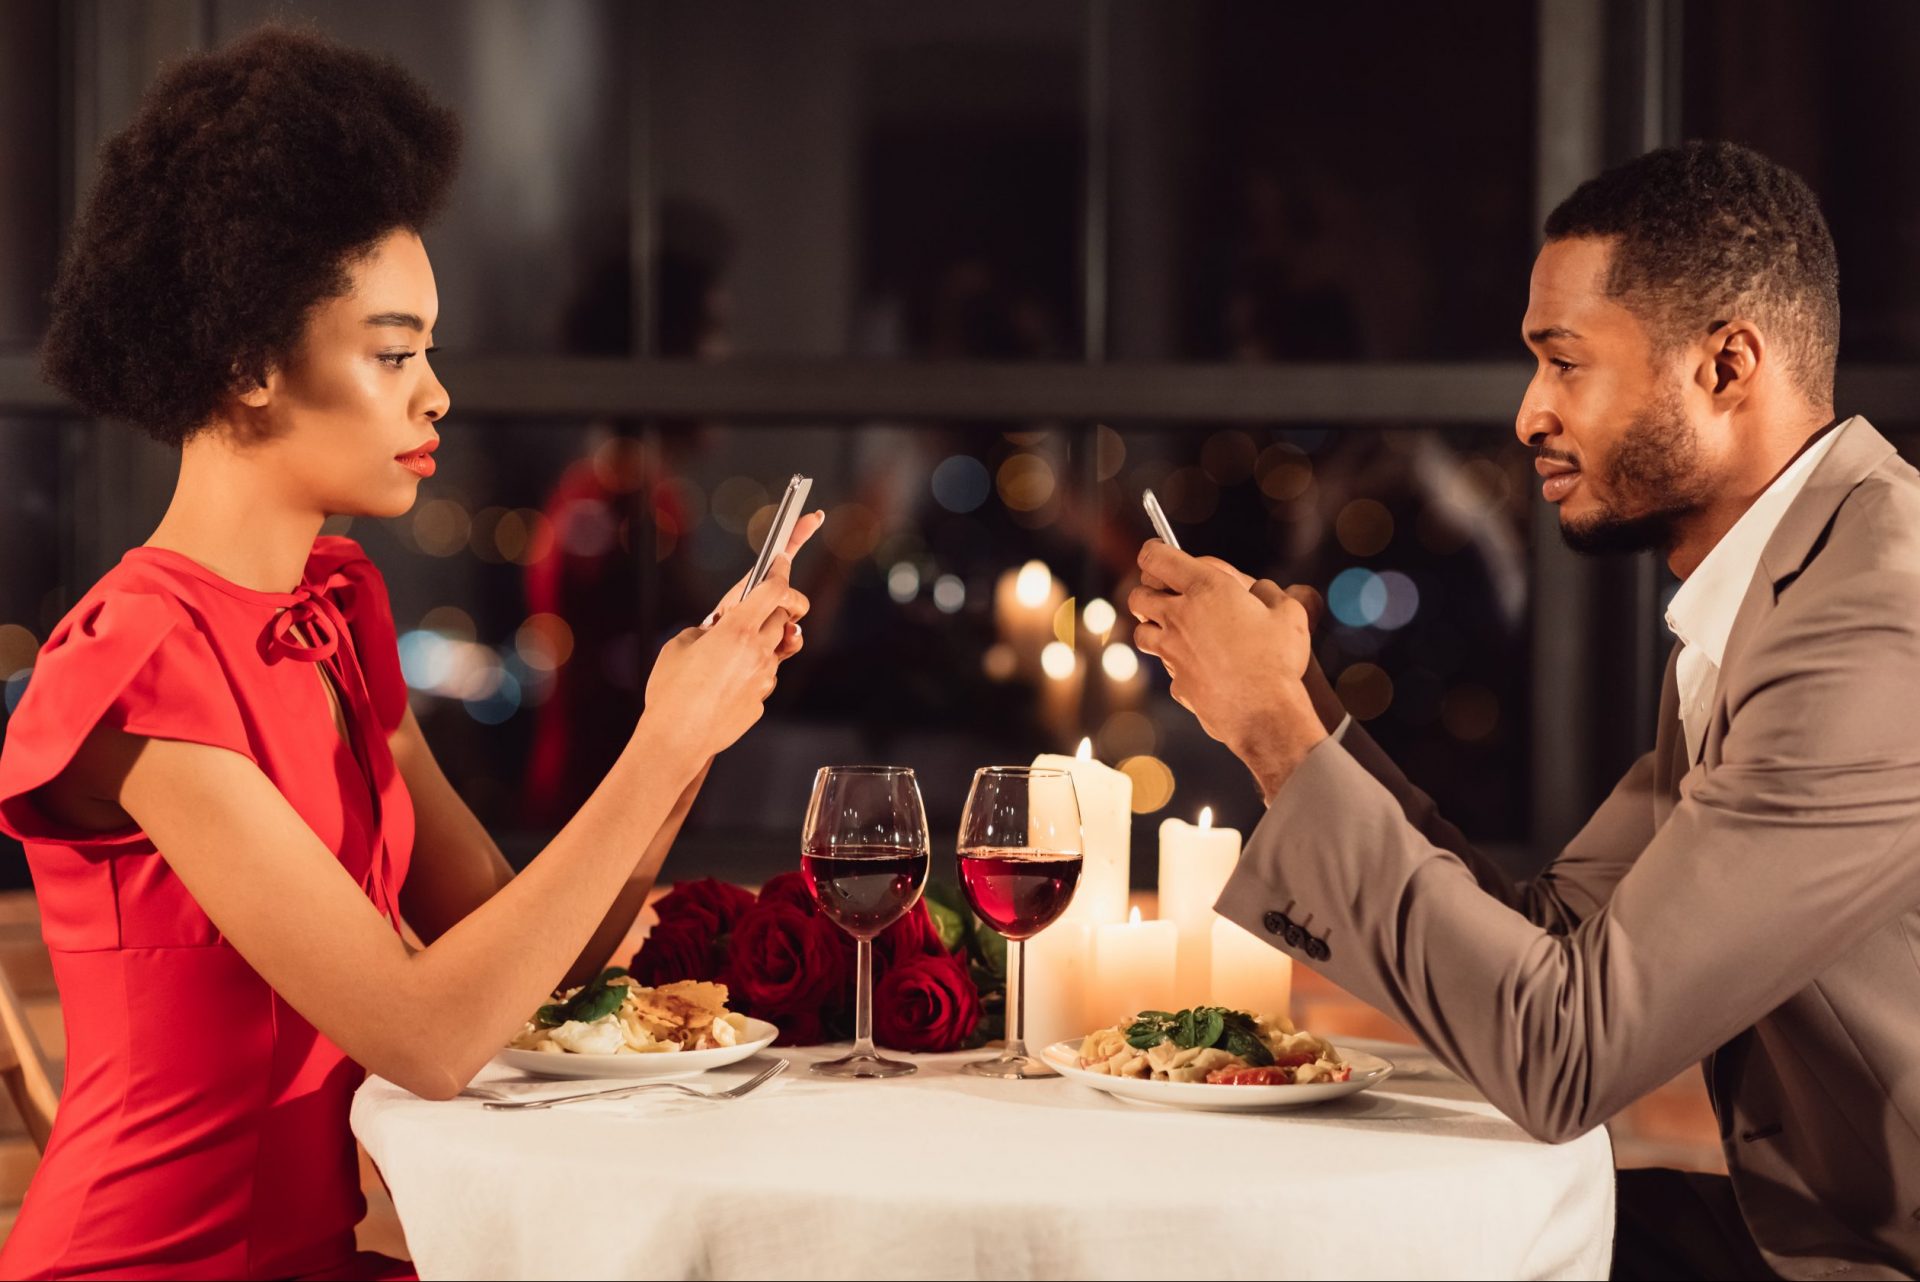 Couple at dinner in restaurant looking at their mobile phones